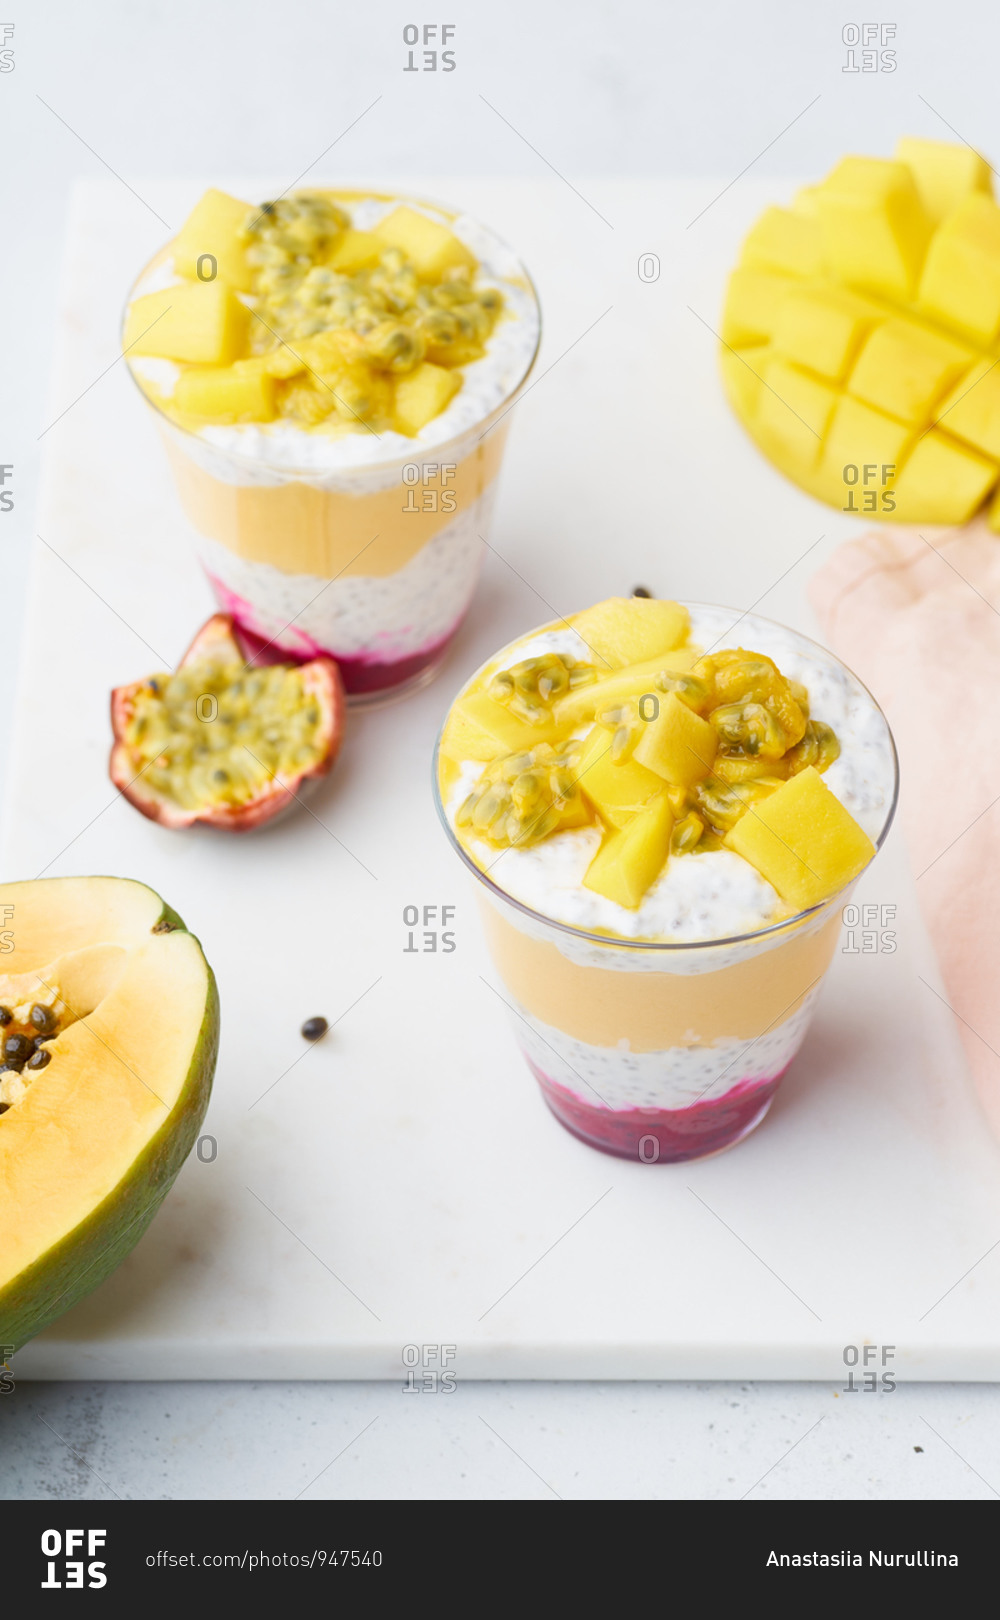 Chia pudding with mango and tropical fruits smoothie. Healthy gourmet breakfast.